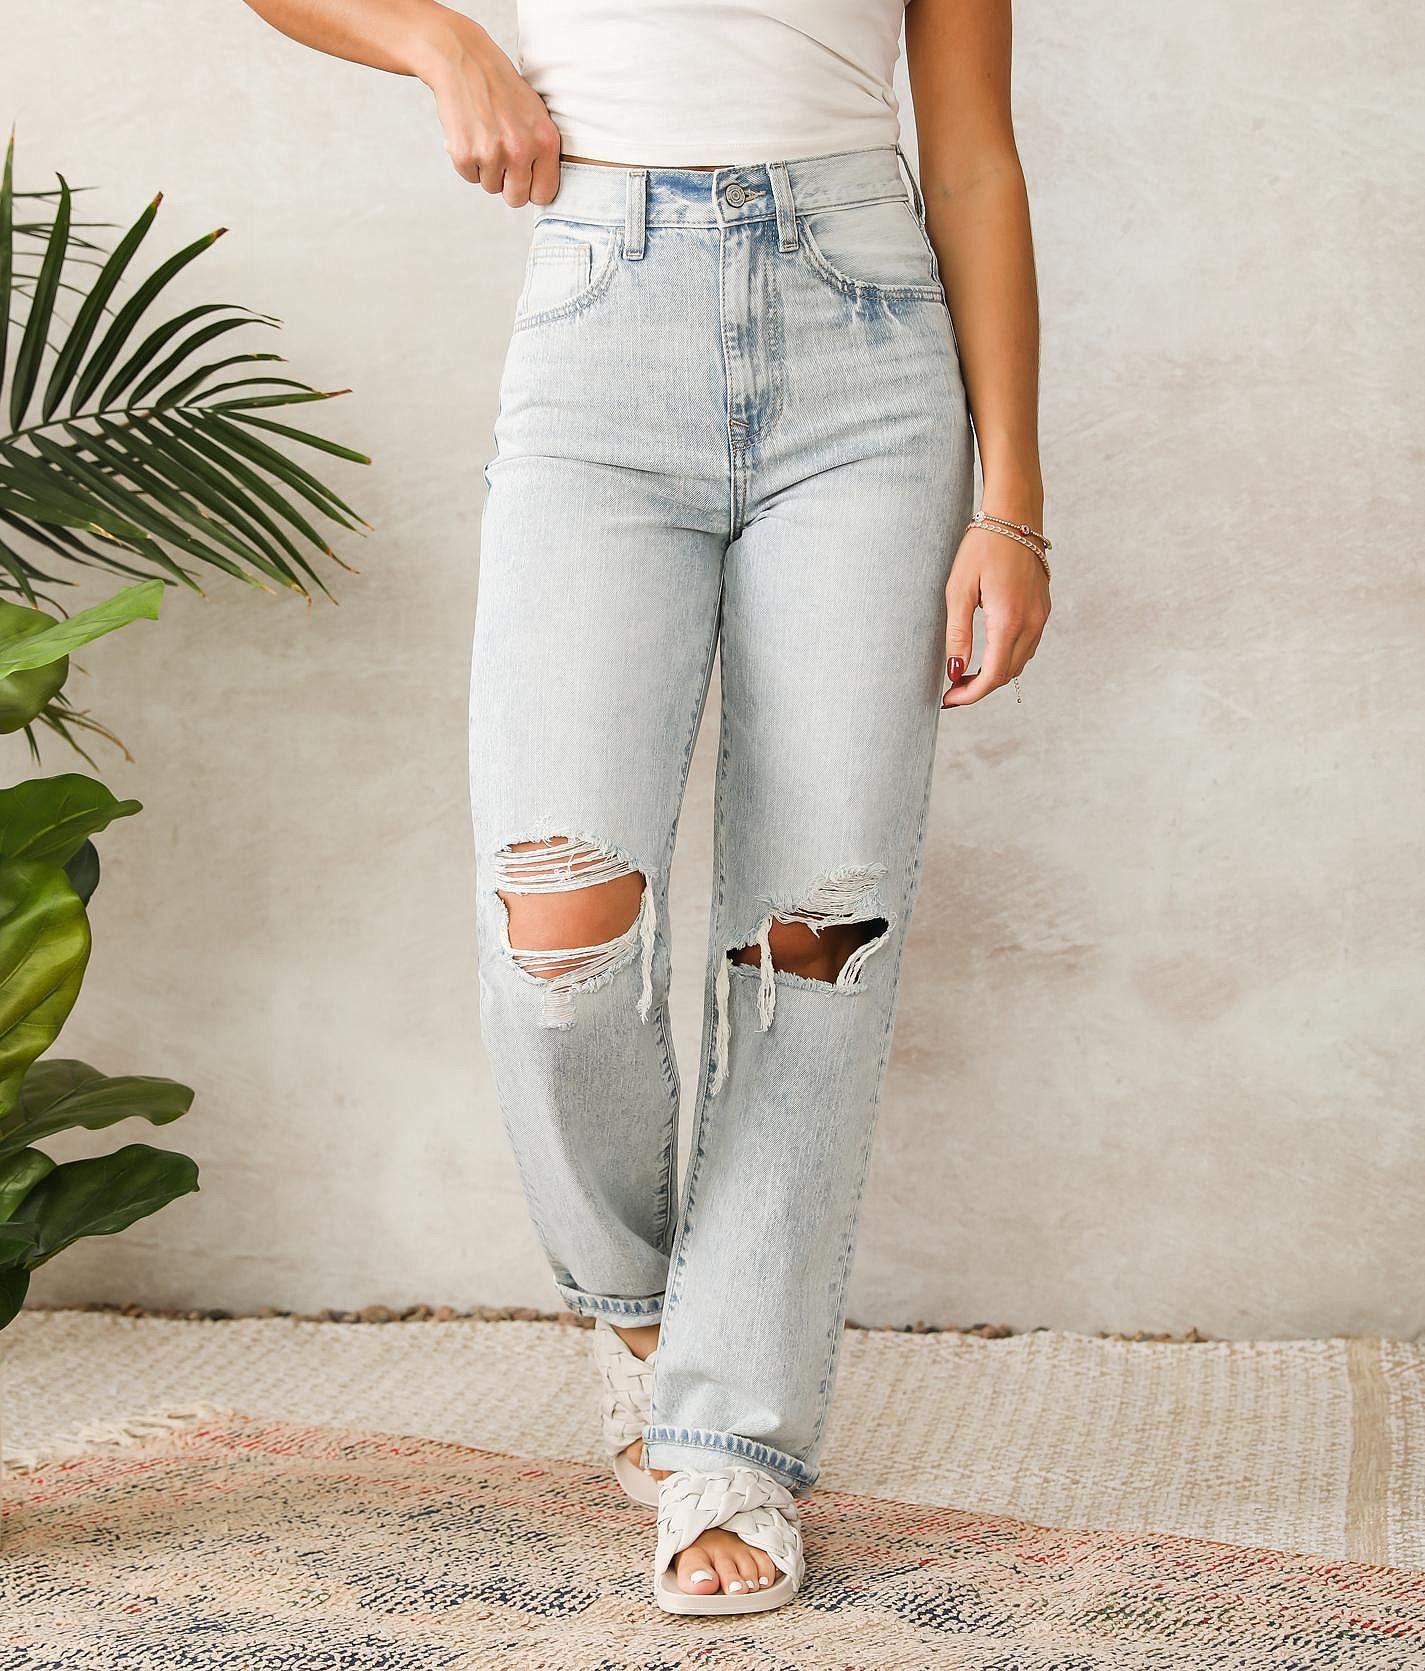 Willow & Root The Vintage Dad Jean - Women's Jeans in River | Buckle